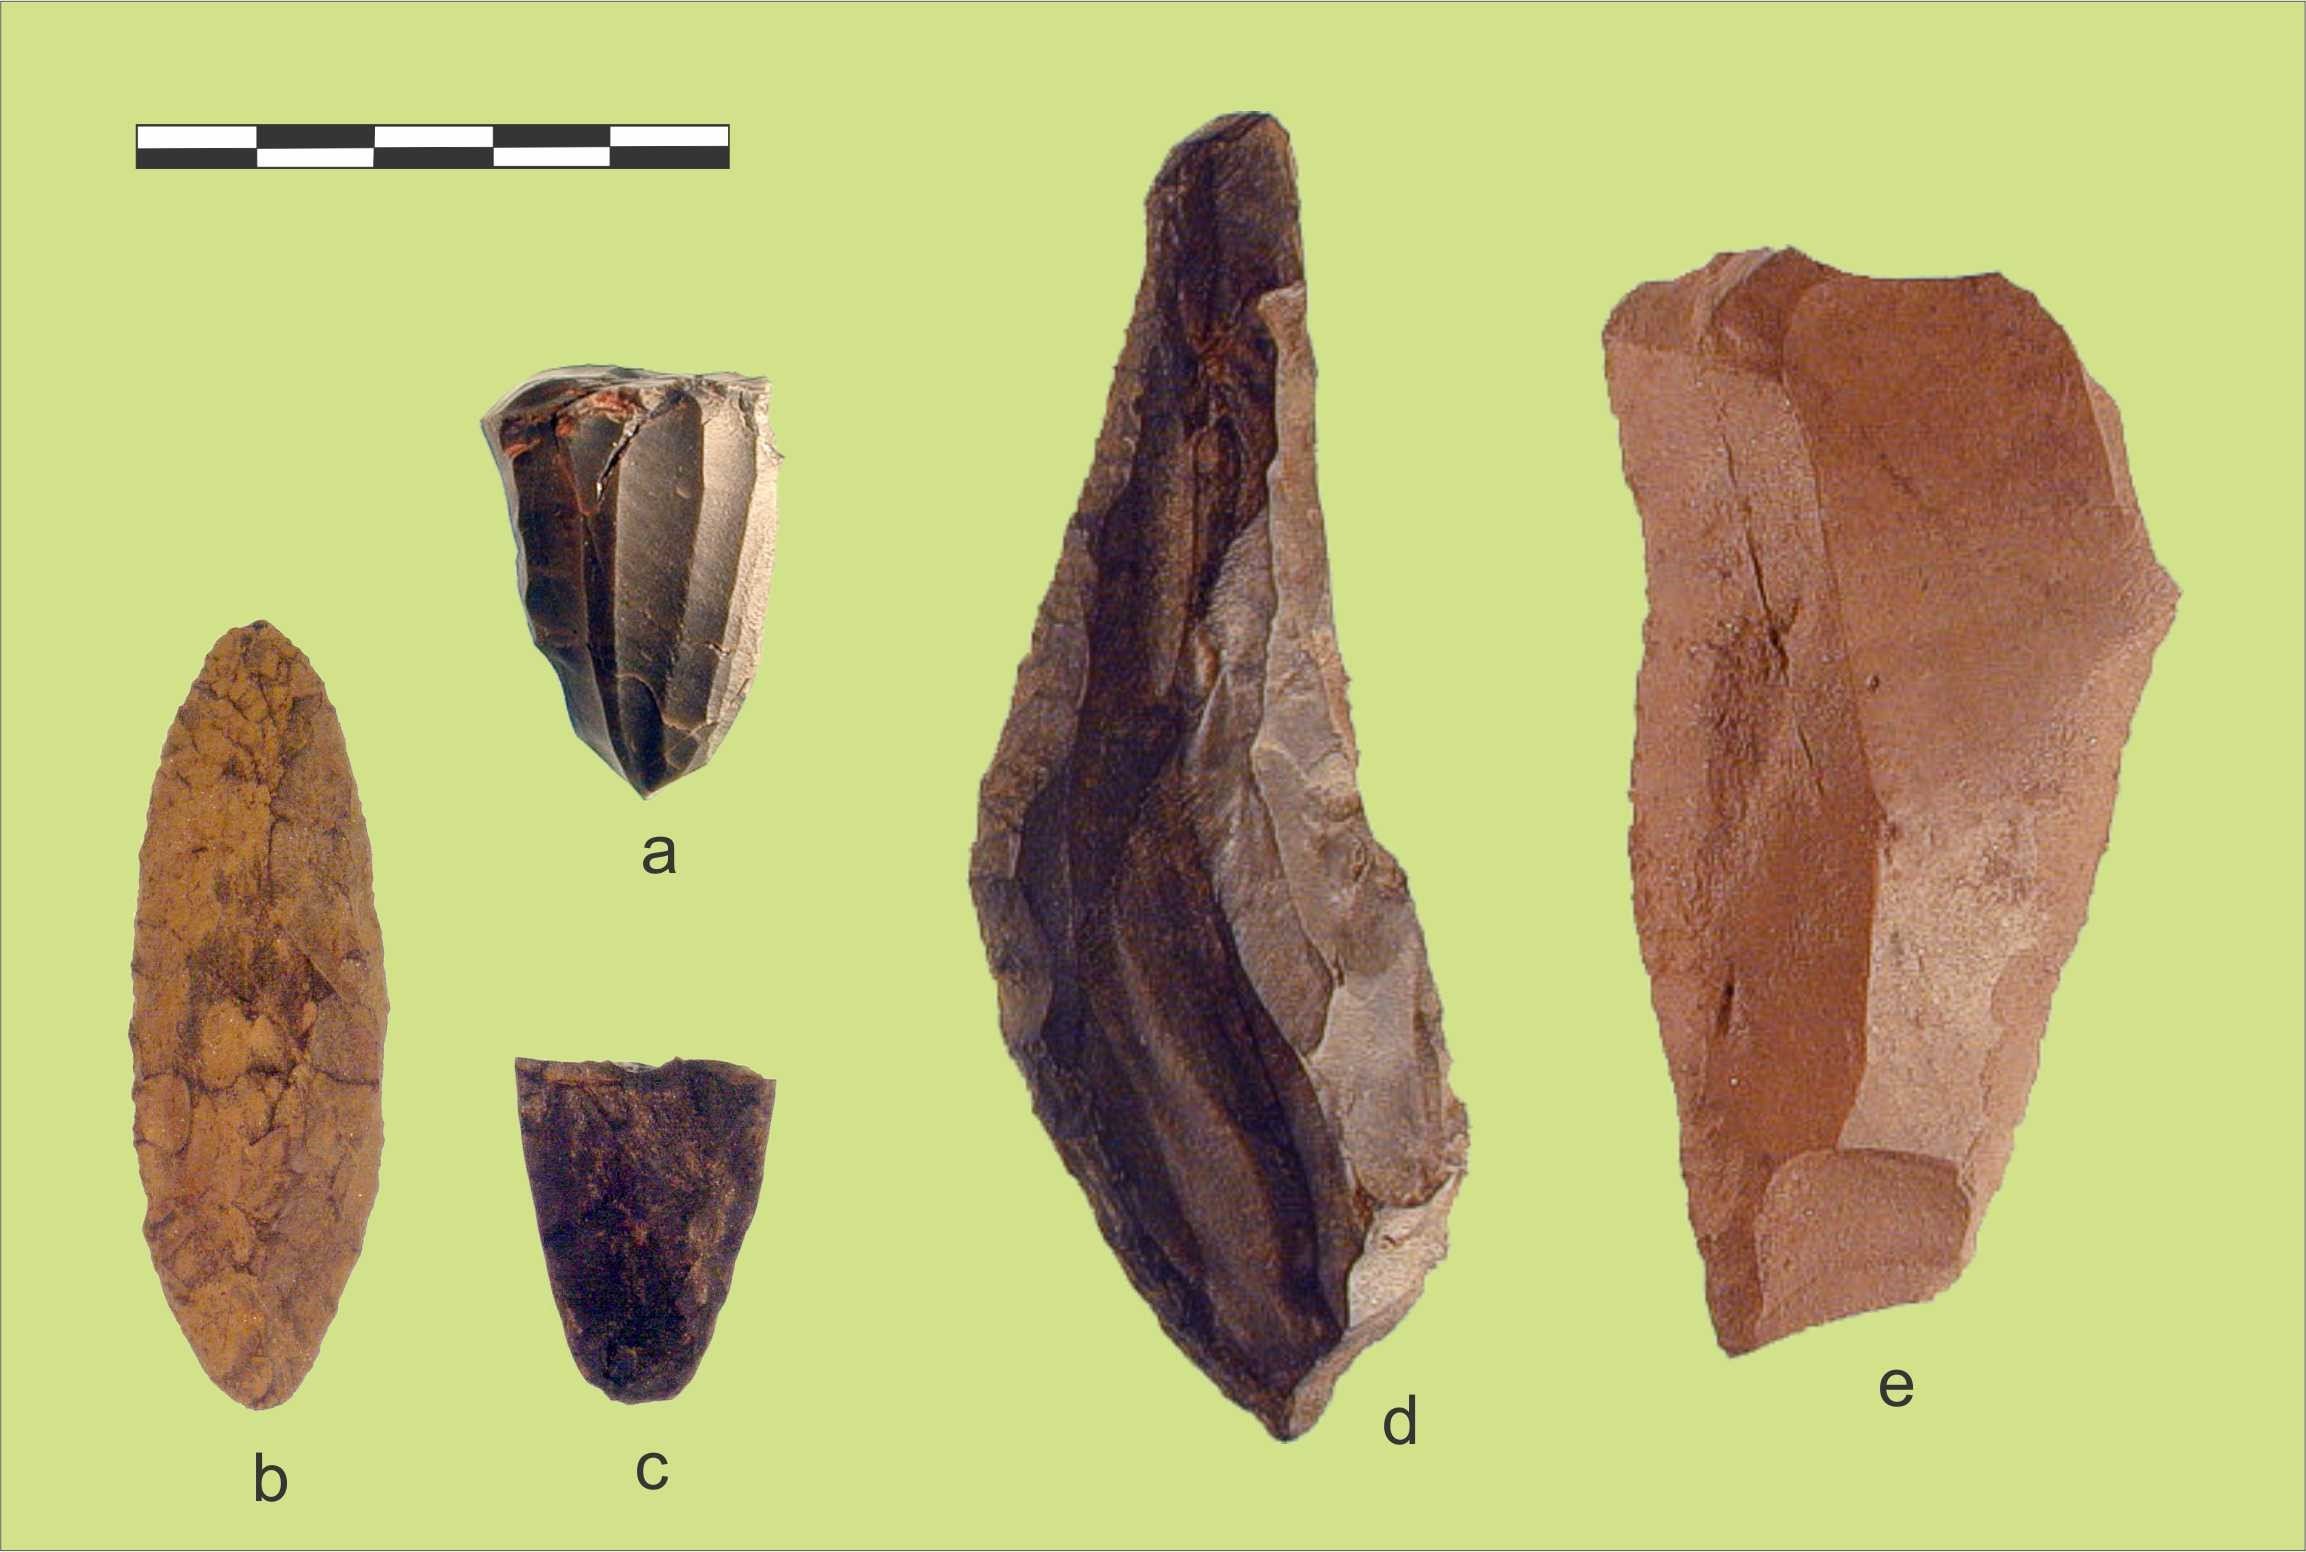 Swan Point Cultural Zone 2 artifacts: a. sub-conical microblade core; b. lanceolate biface; c. lanceolate point base fragment; d., e. side scrapers.